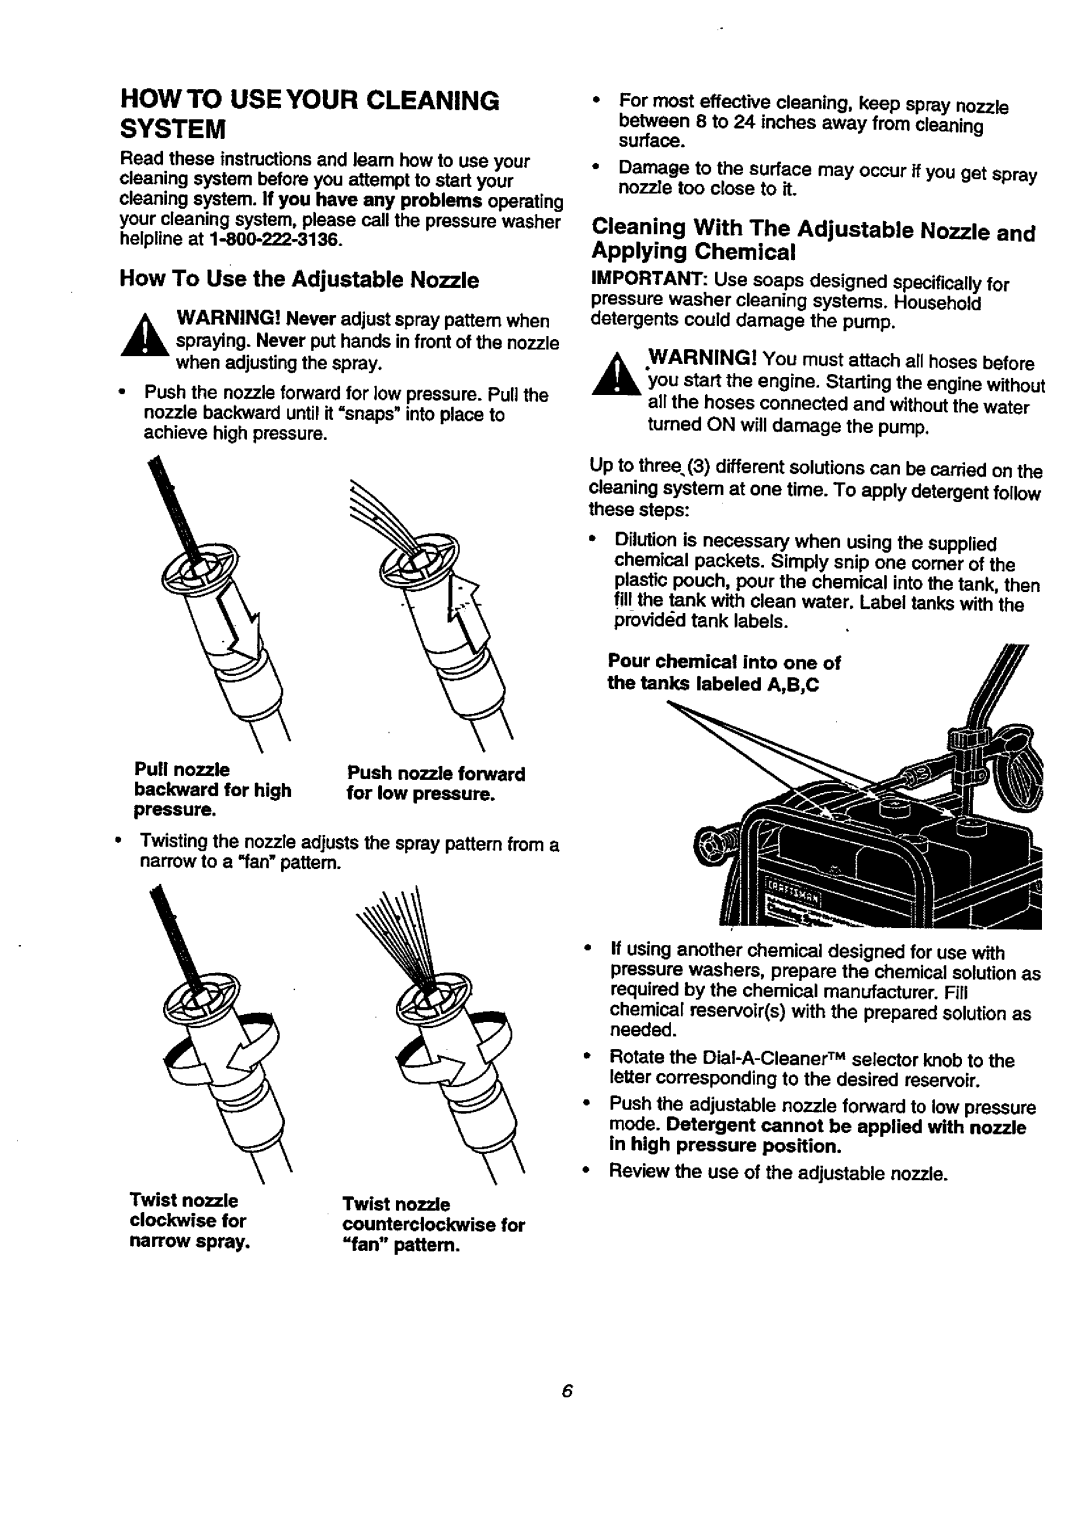 Craftsman 580.76804 manual System, How To Use Your Cleaning, How To Use the Adjustable Nozzle 